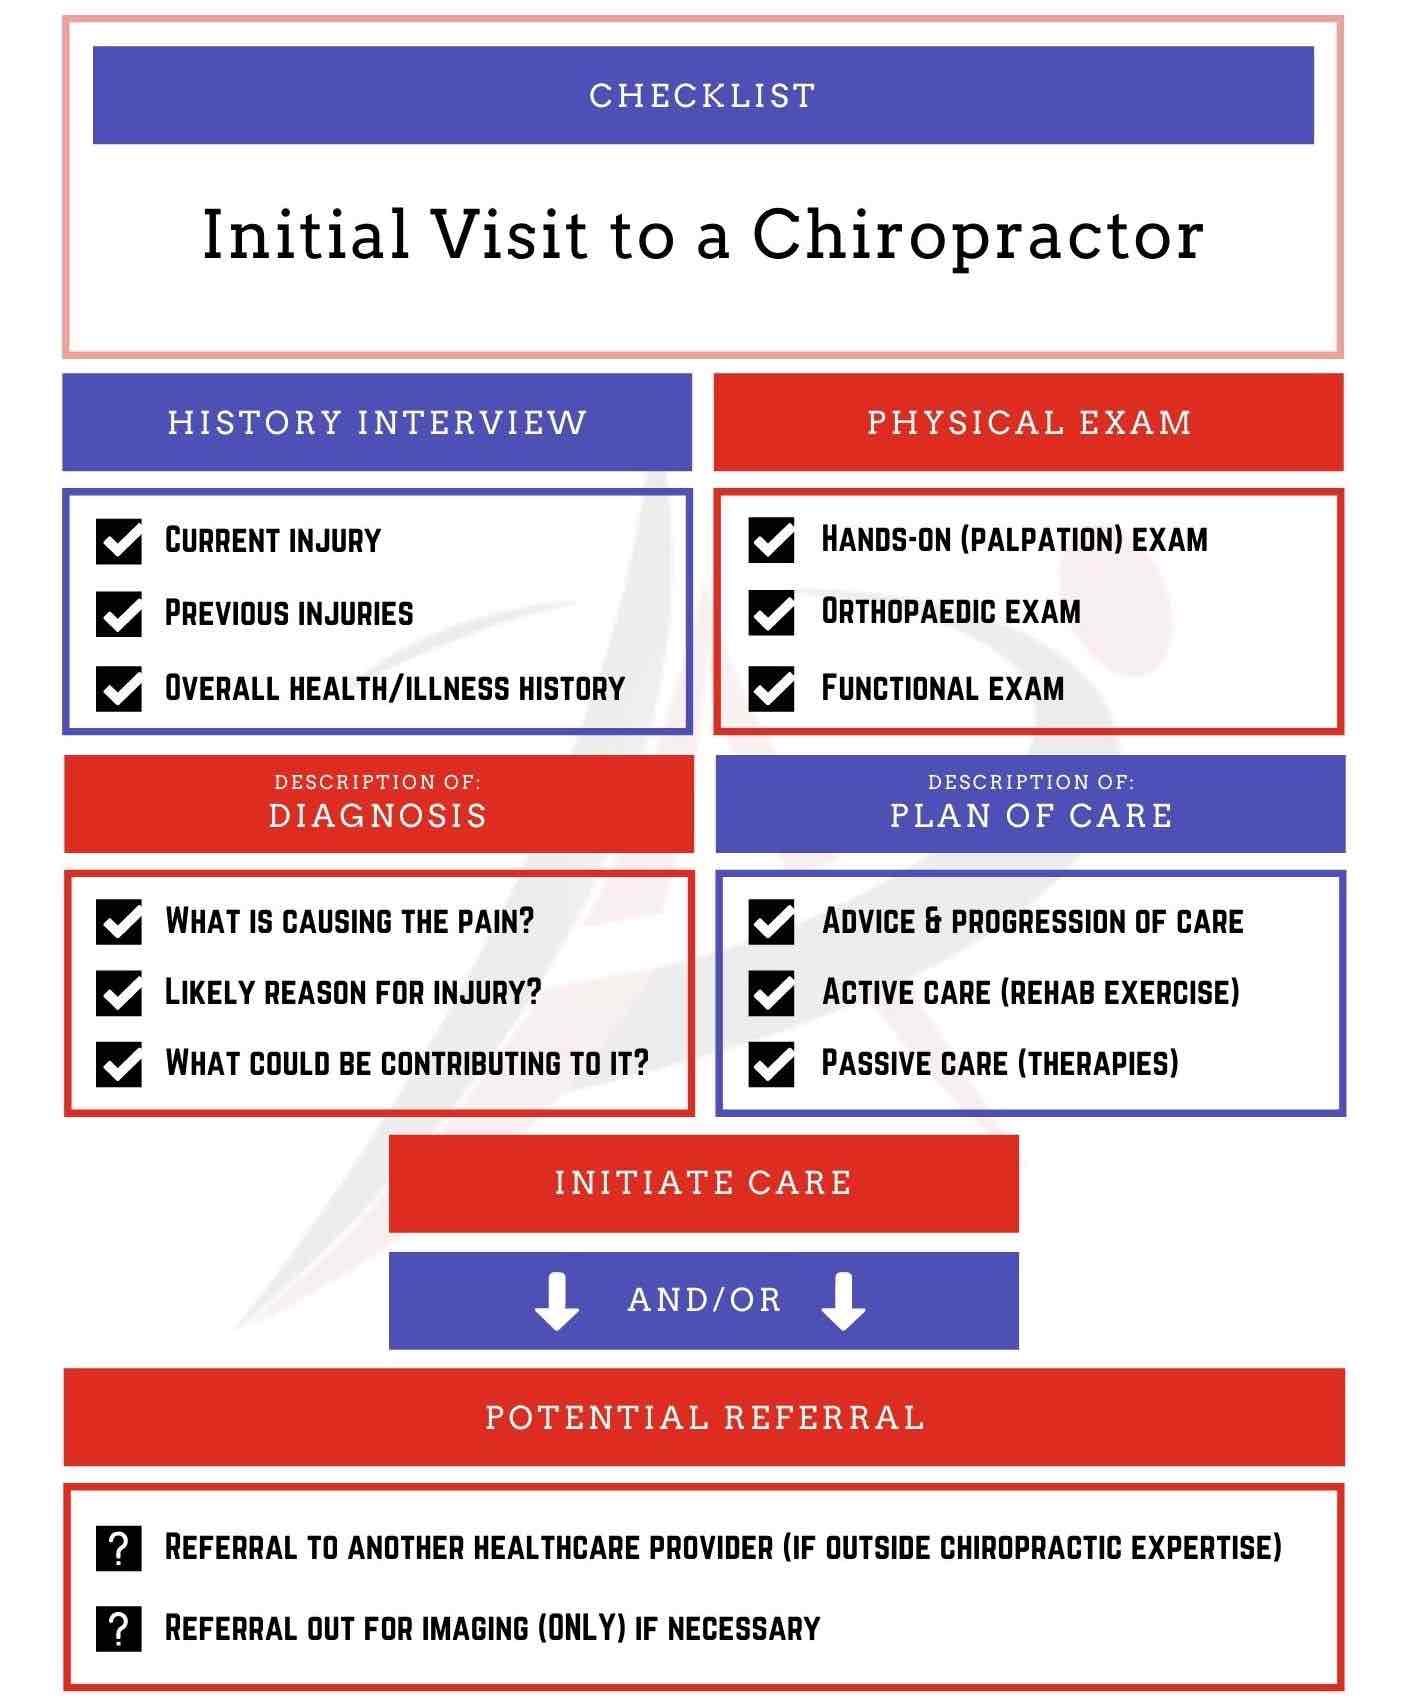 What to expect from a visit to a chiropractor checklist image